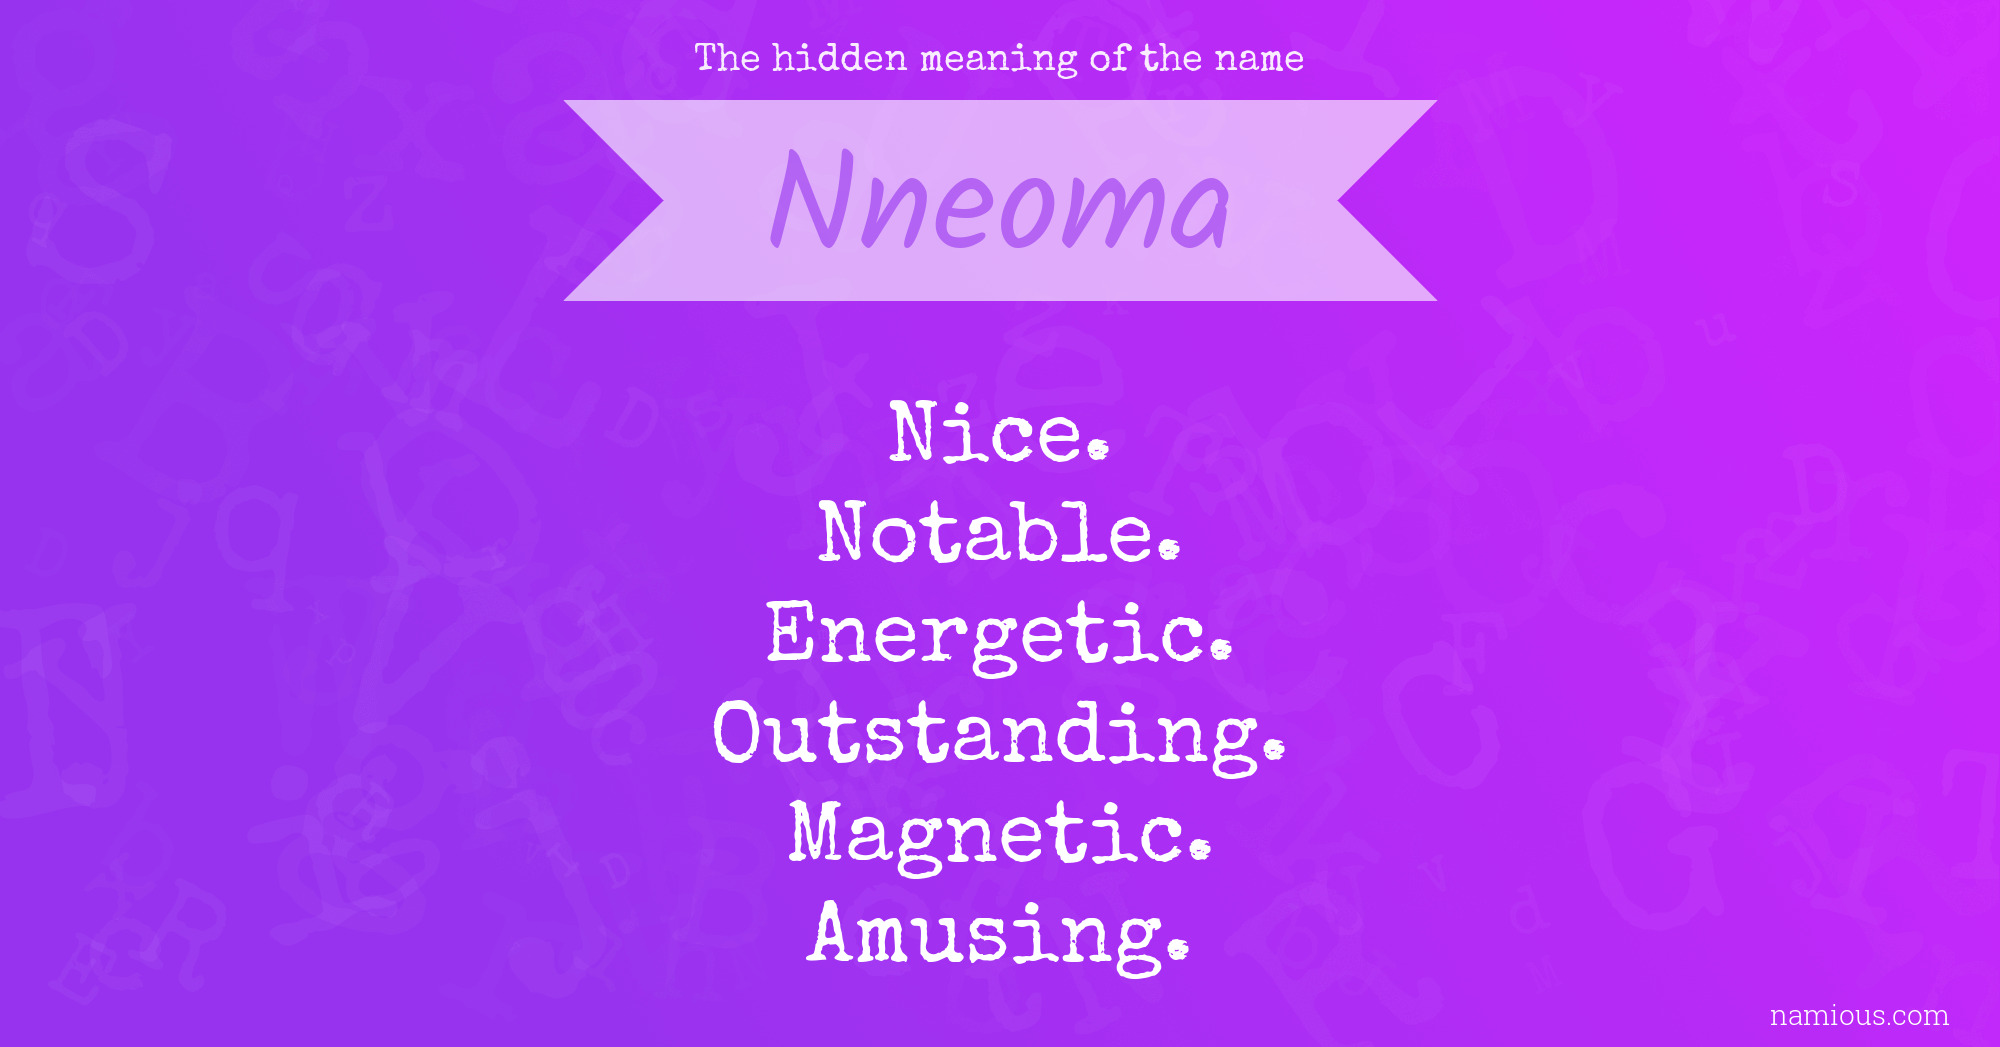 The hidden meaning of the name Nneoma